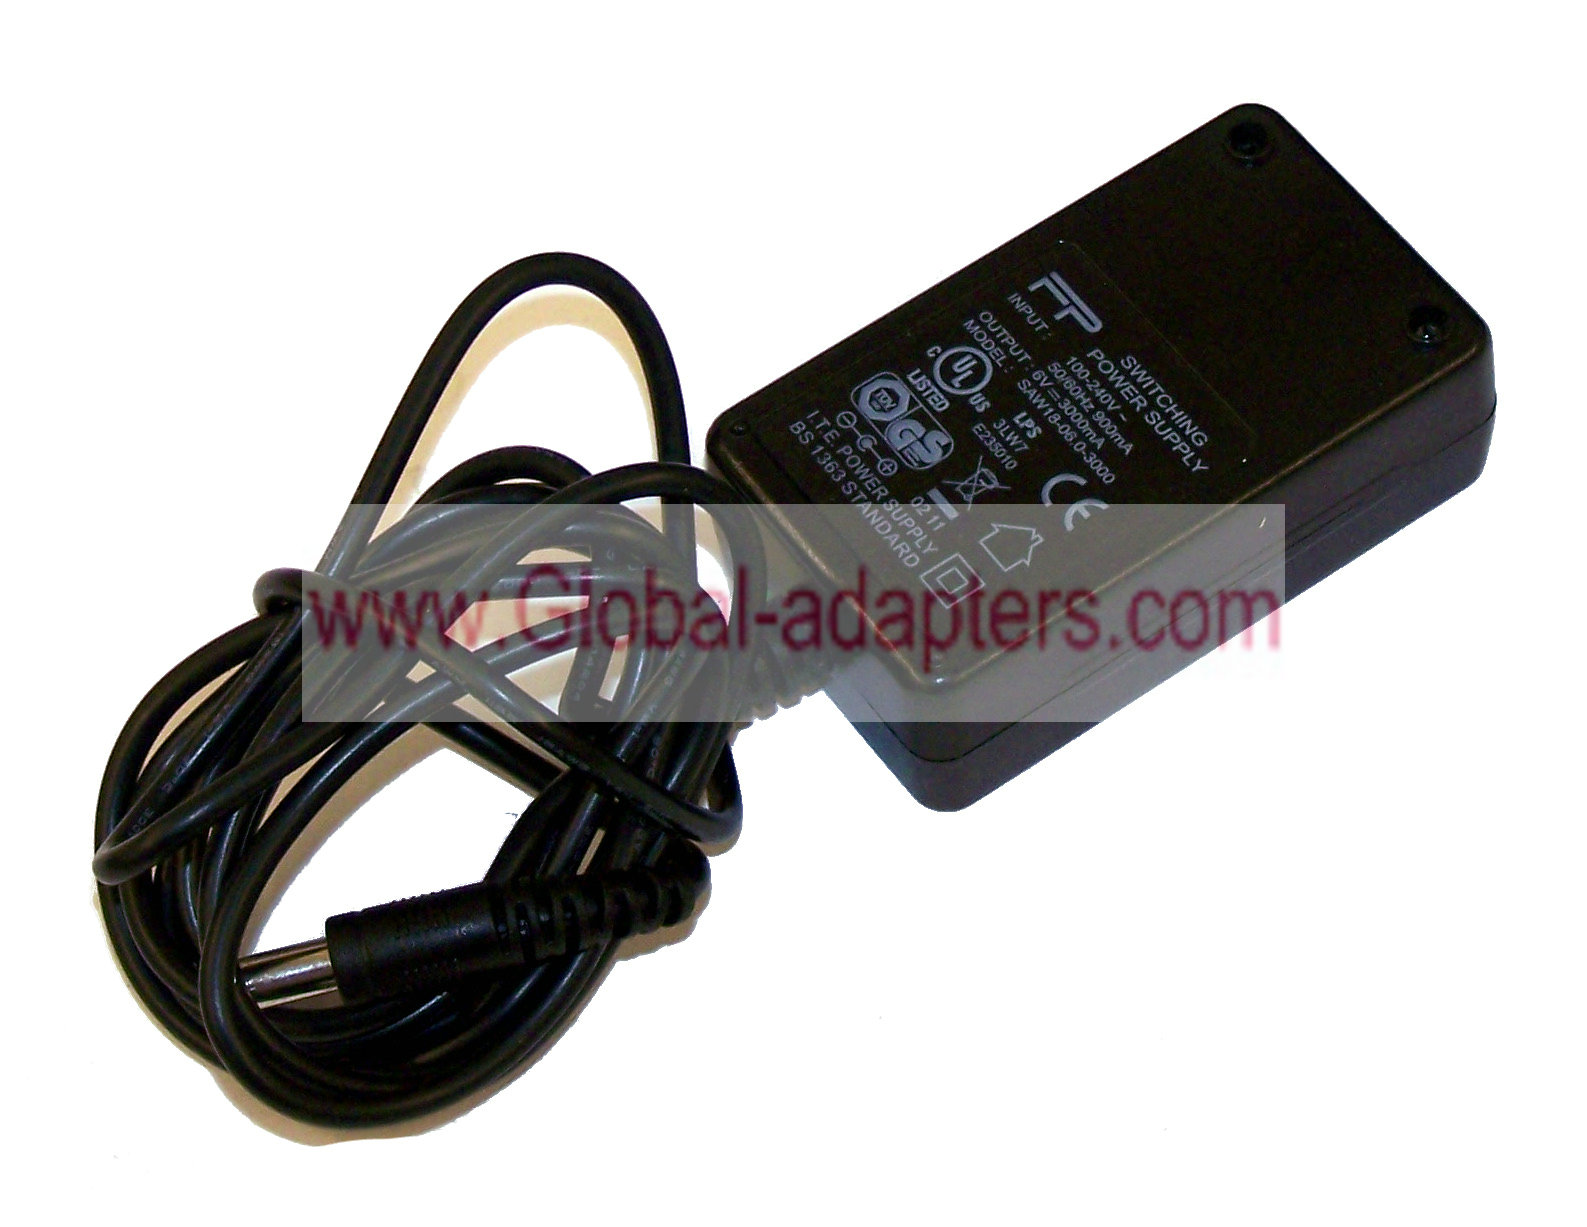 NEW FP SAW18-06.0-3000 Power supply 6VDC 3000mA AC Adapter